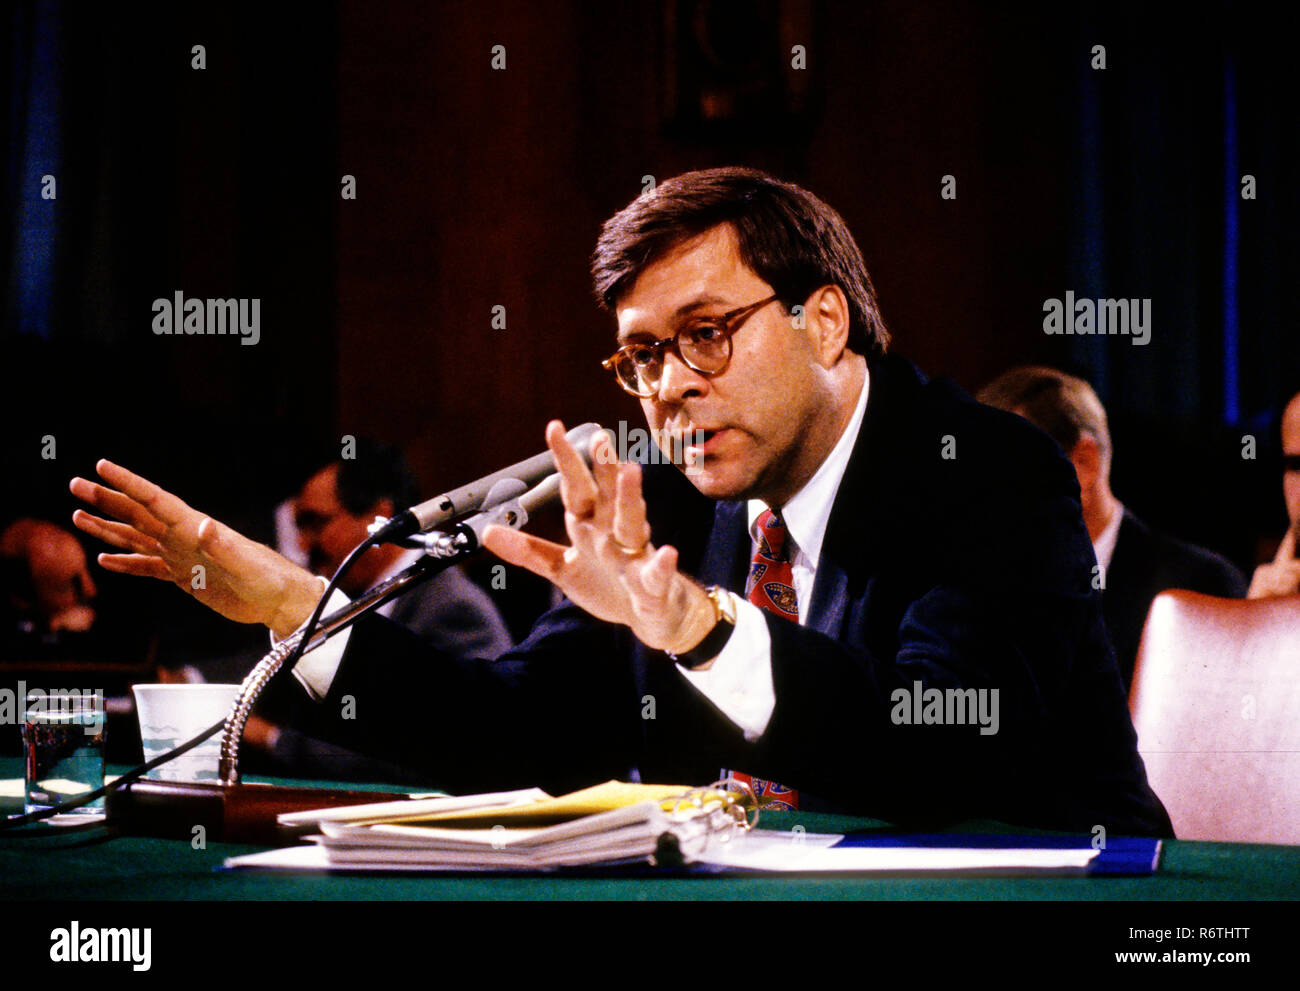 William P. Barr, who was was appointed by United States President George H.W. Bush to be the 77th US Attorney General, testifies before the US Senate Committee on the Judiciary on Capitol Hill in Washington, DC on November 12, 1991. Credit: Ron Sachs/CNP | usage worldwide Stock Photo